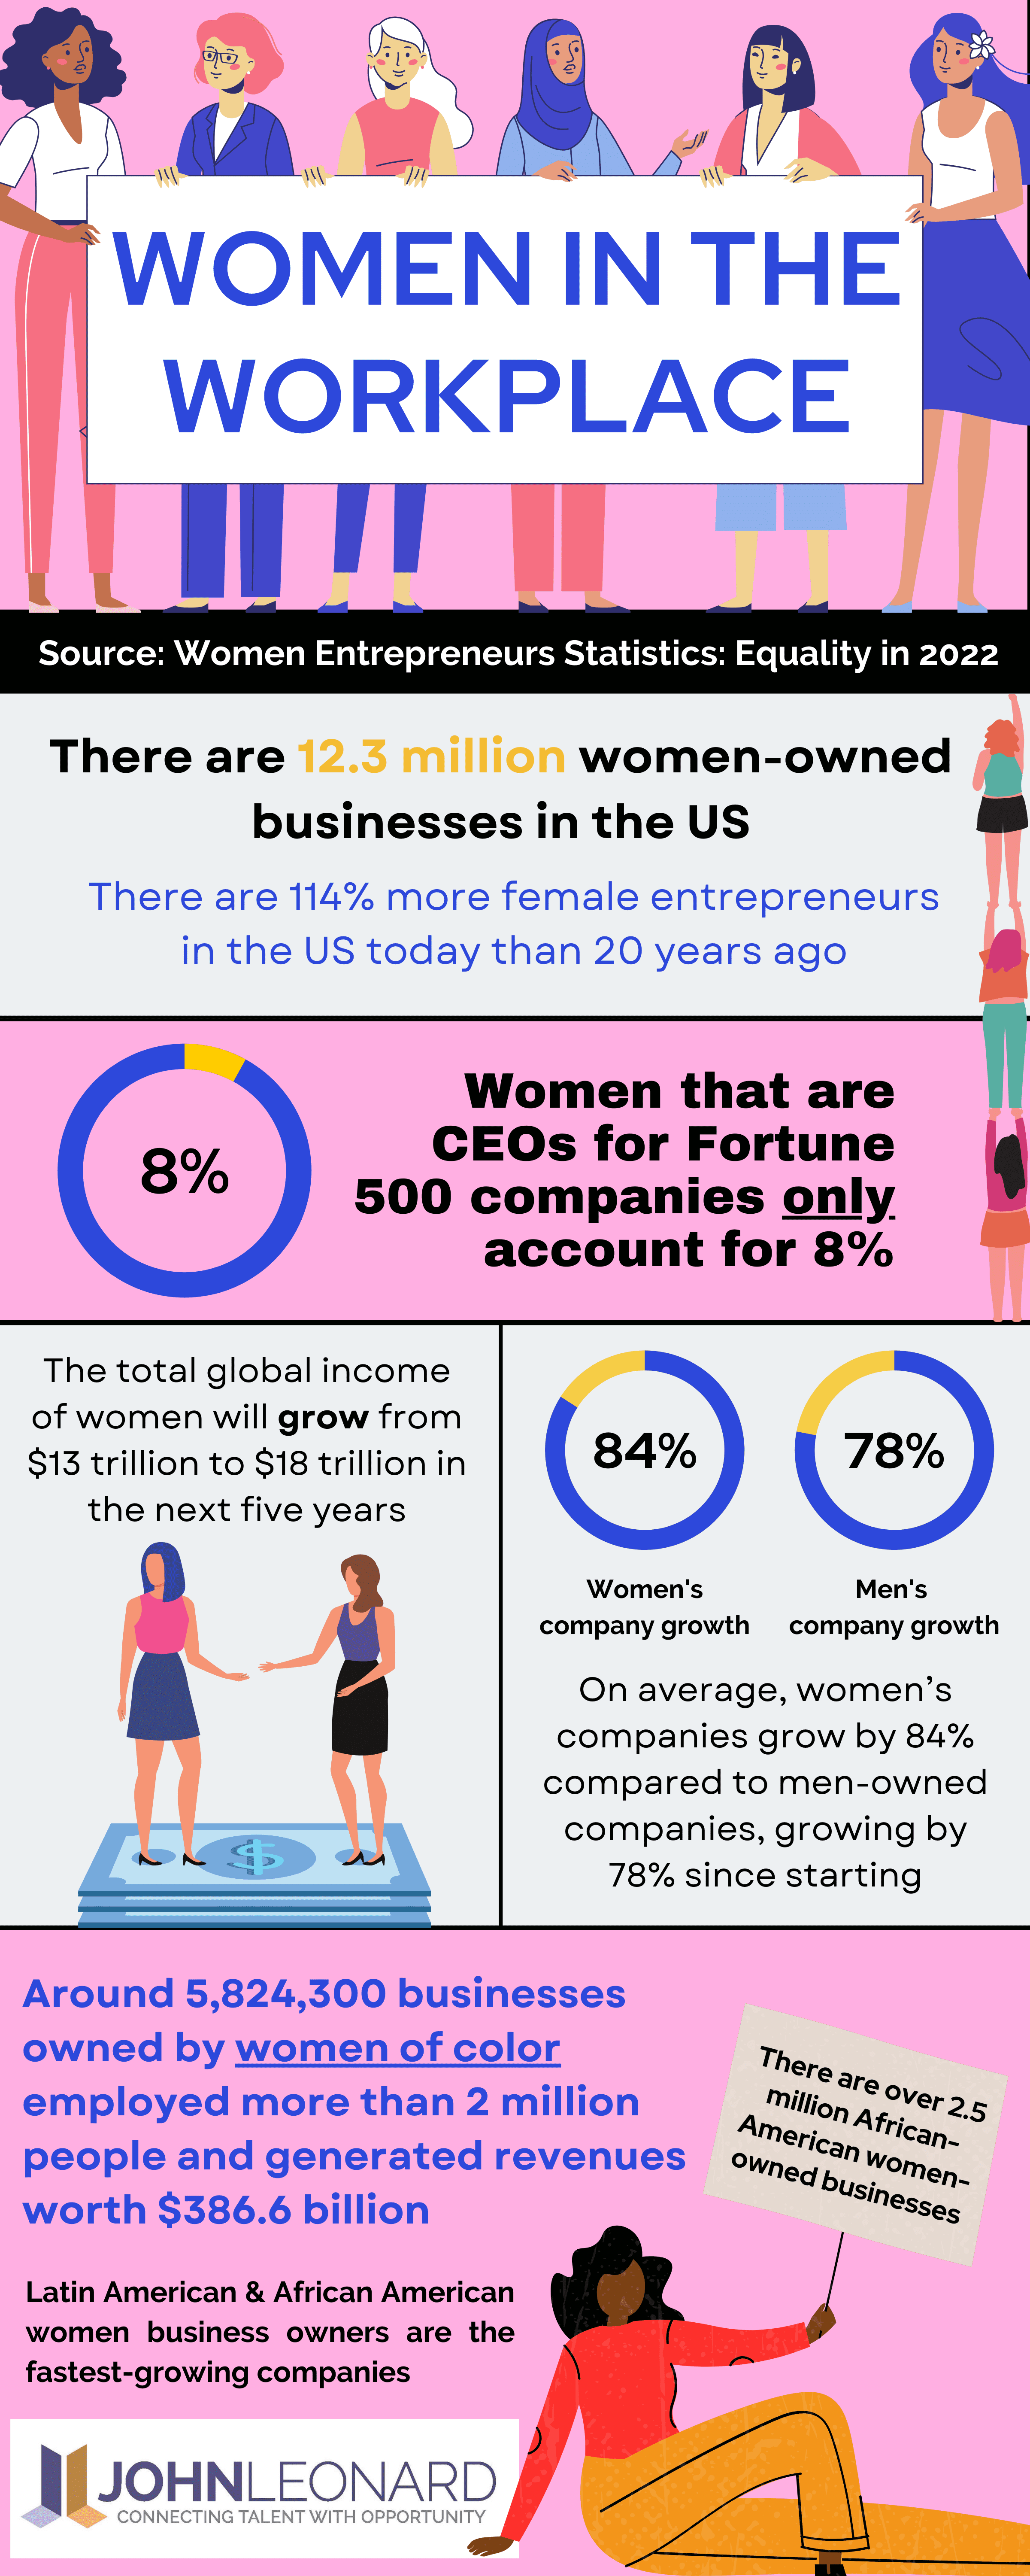 Women in the workplace 2022 (infographic)